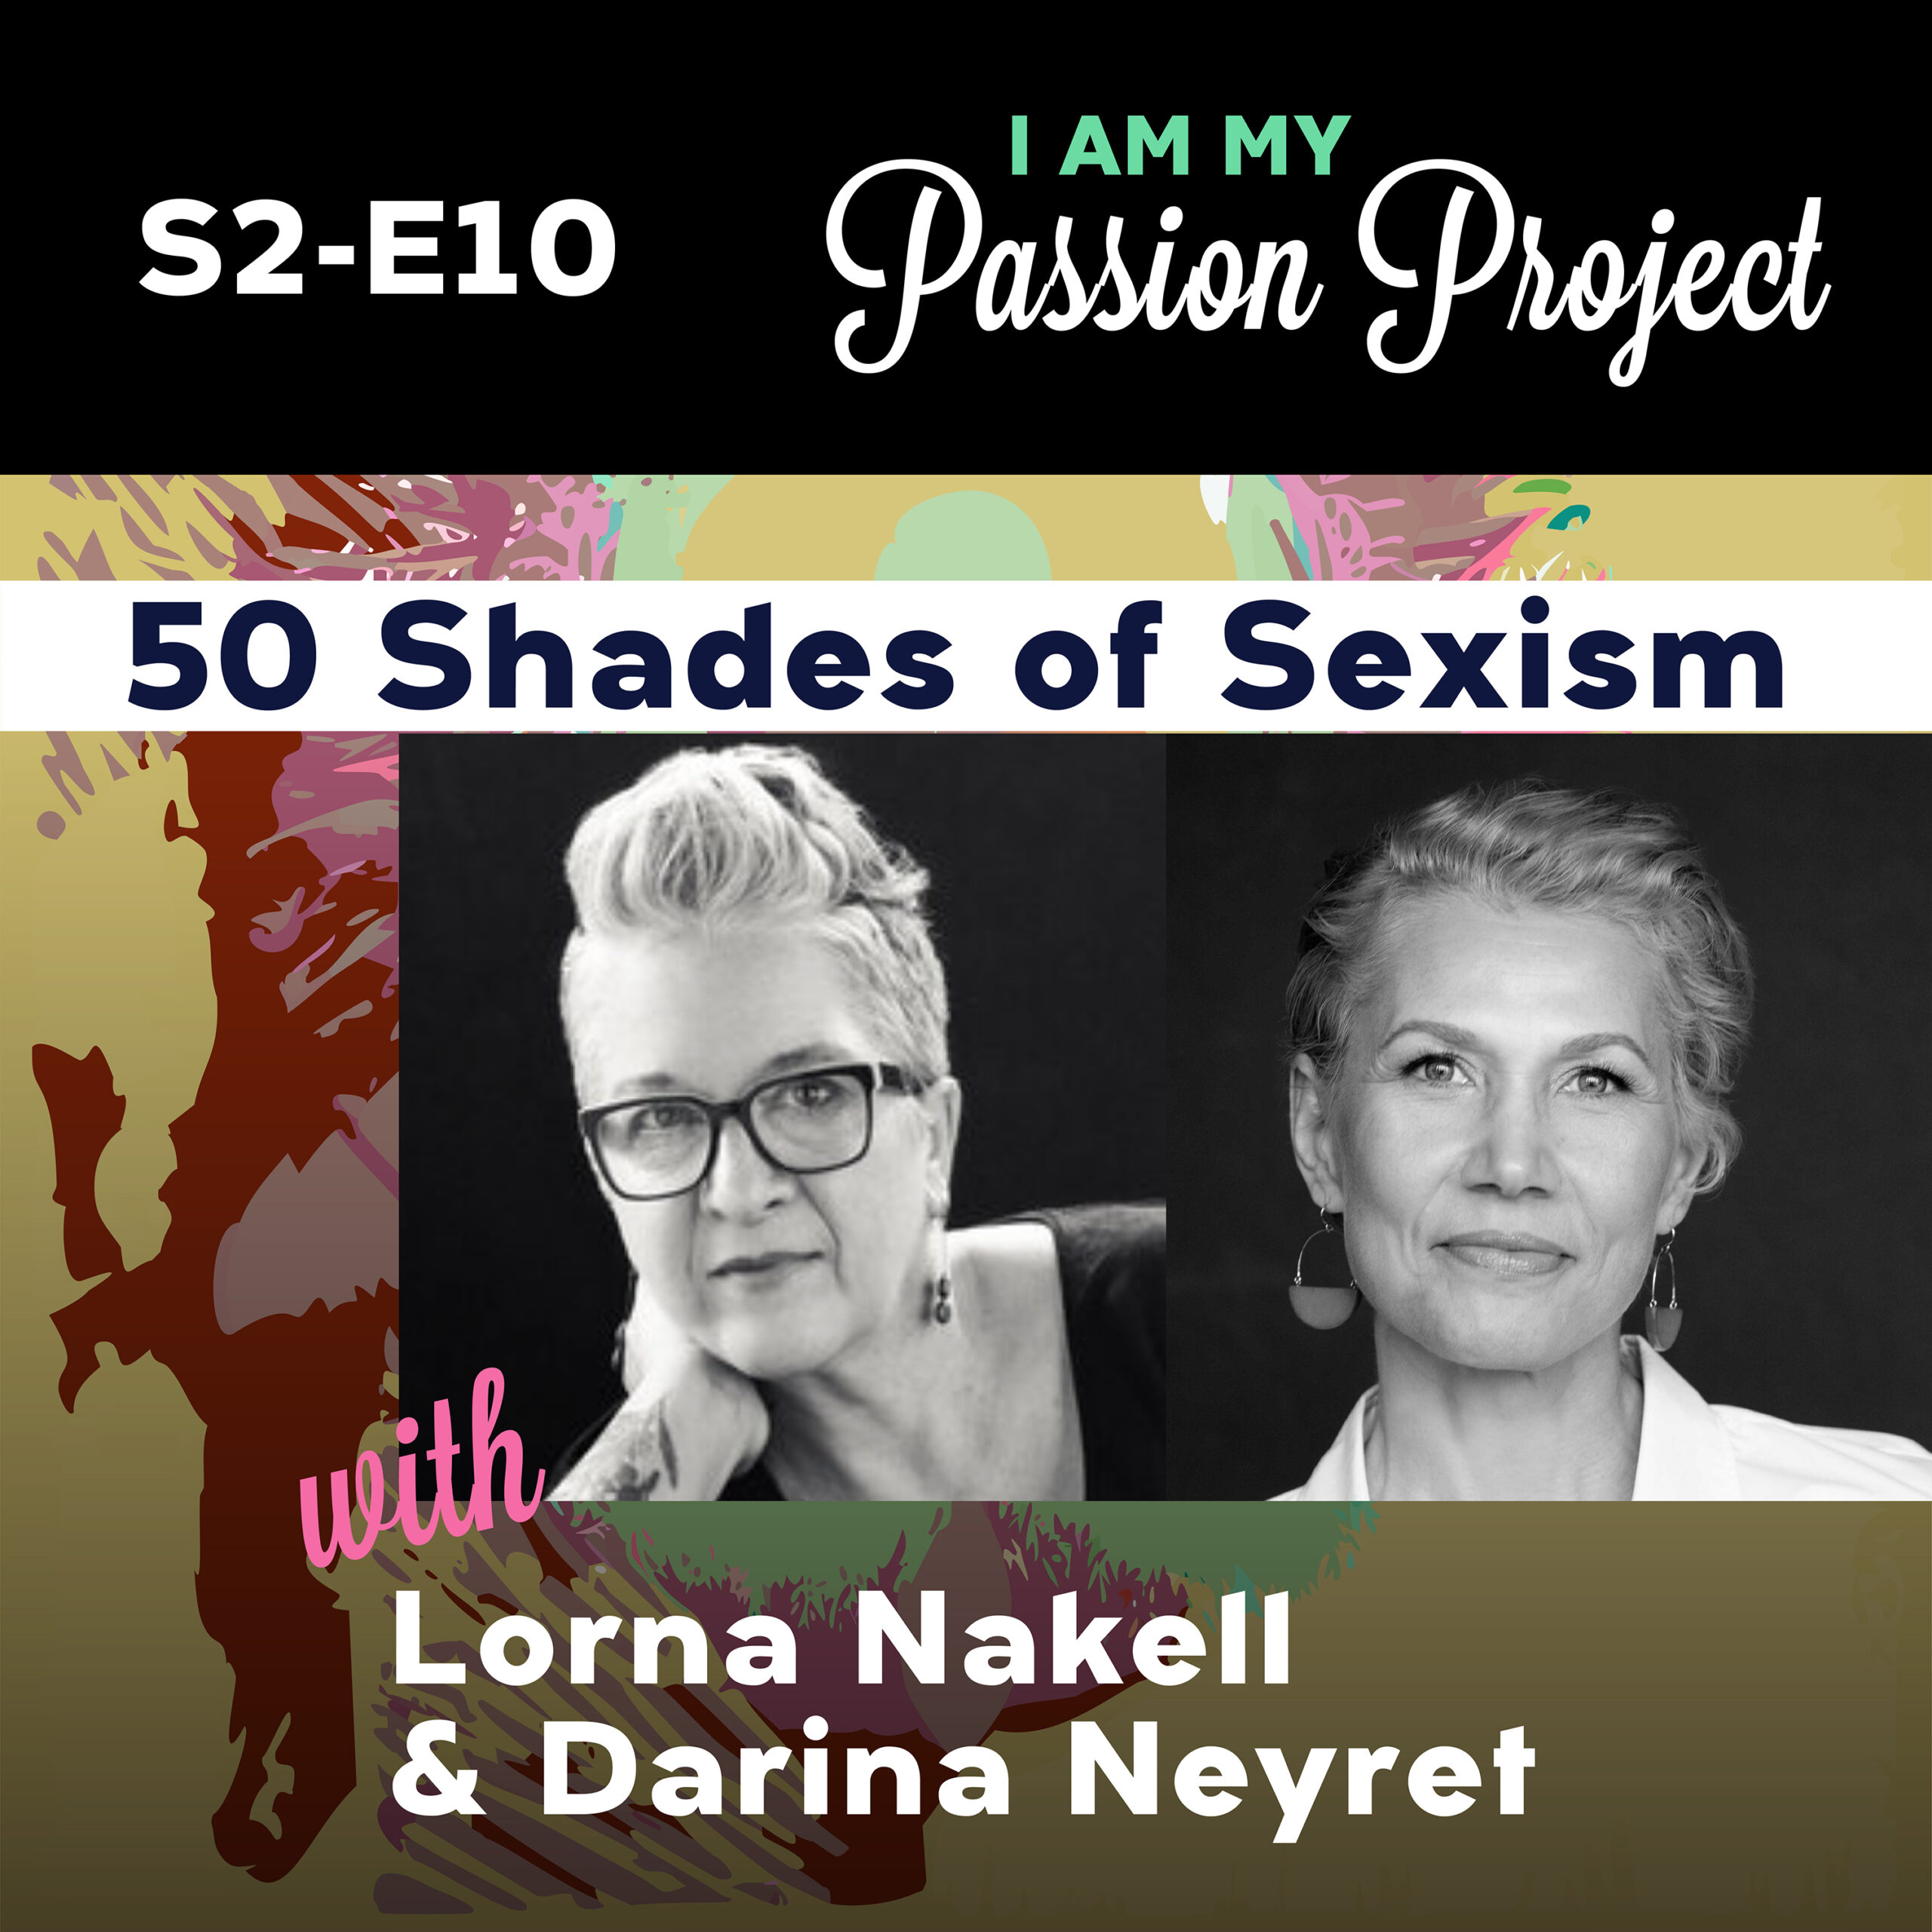 50 Shades of Sexism Reviews the Movie: Casablanca with Darina Neyret and Lorna Nakell